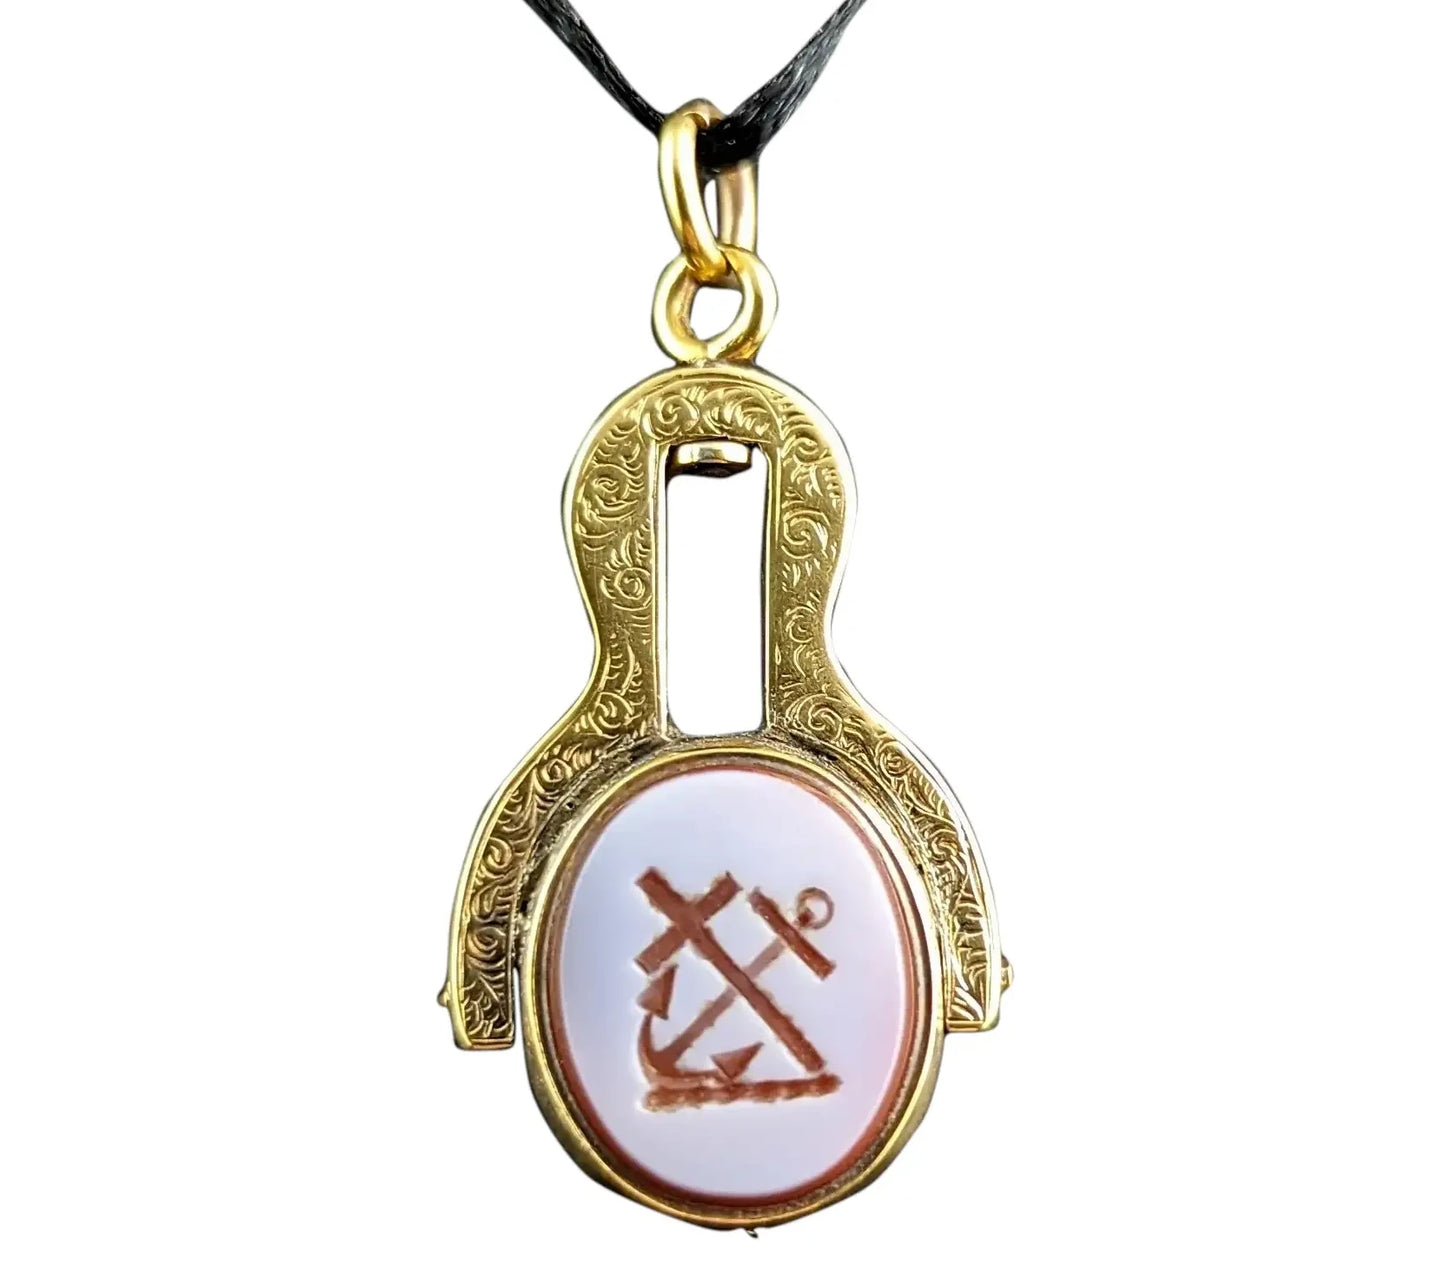 Antique Faith and Hope seal fob pendant, 9ct gold, Sardonyx and Bloodstone